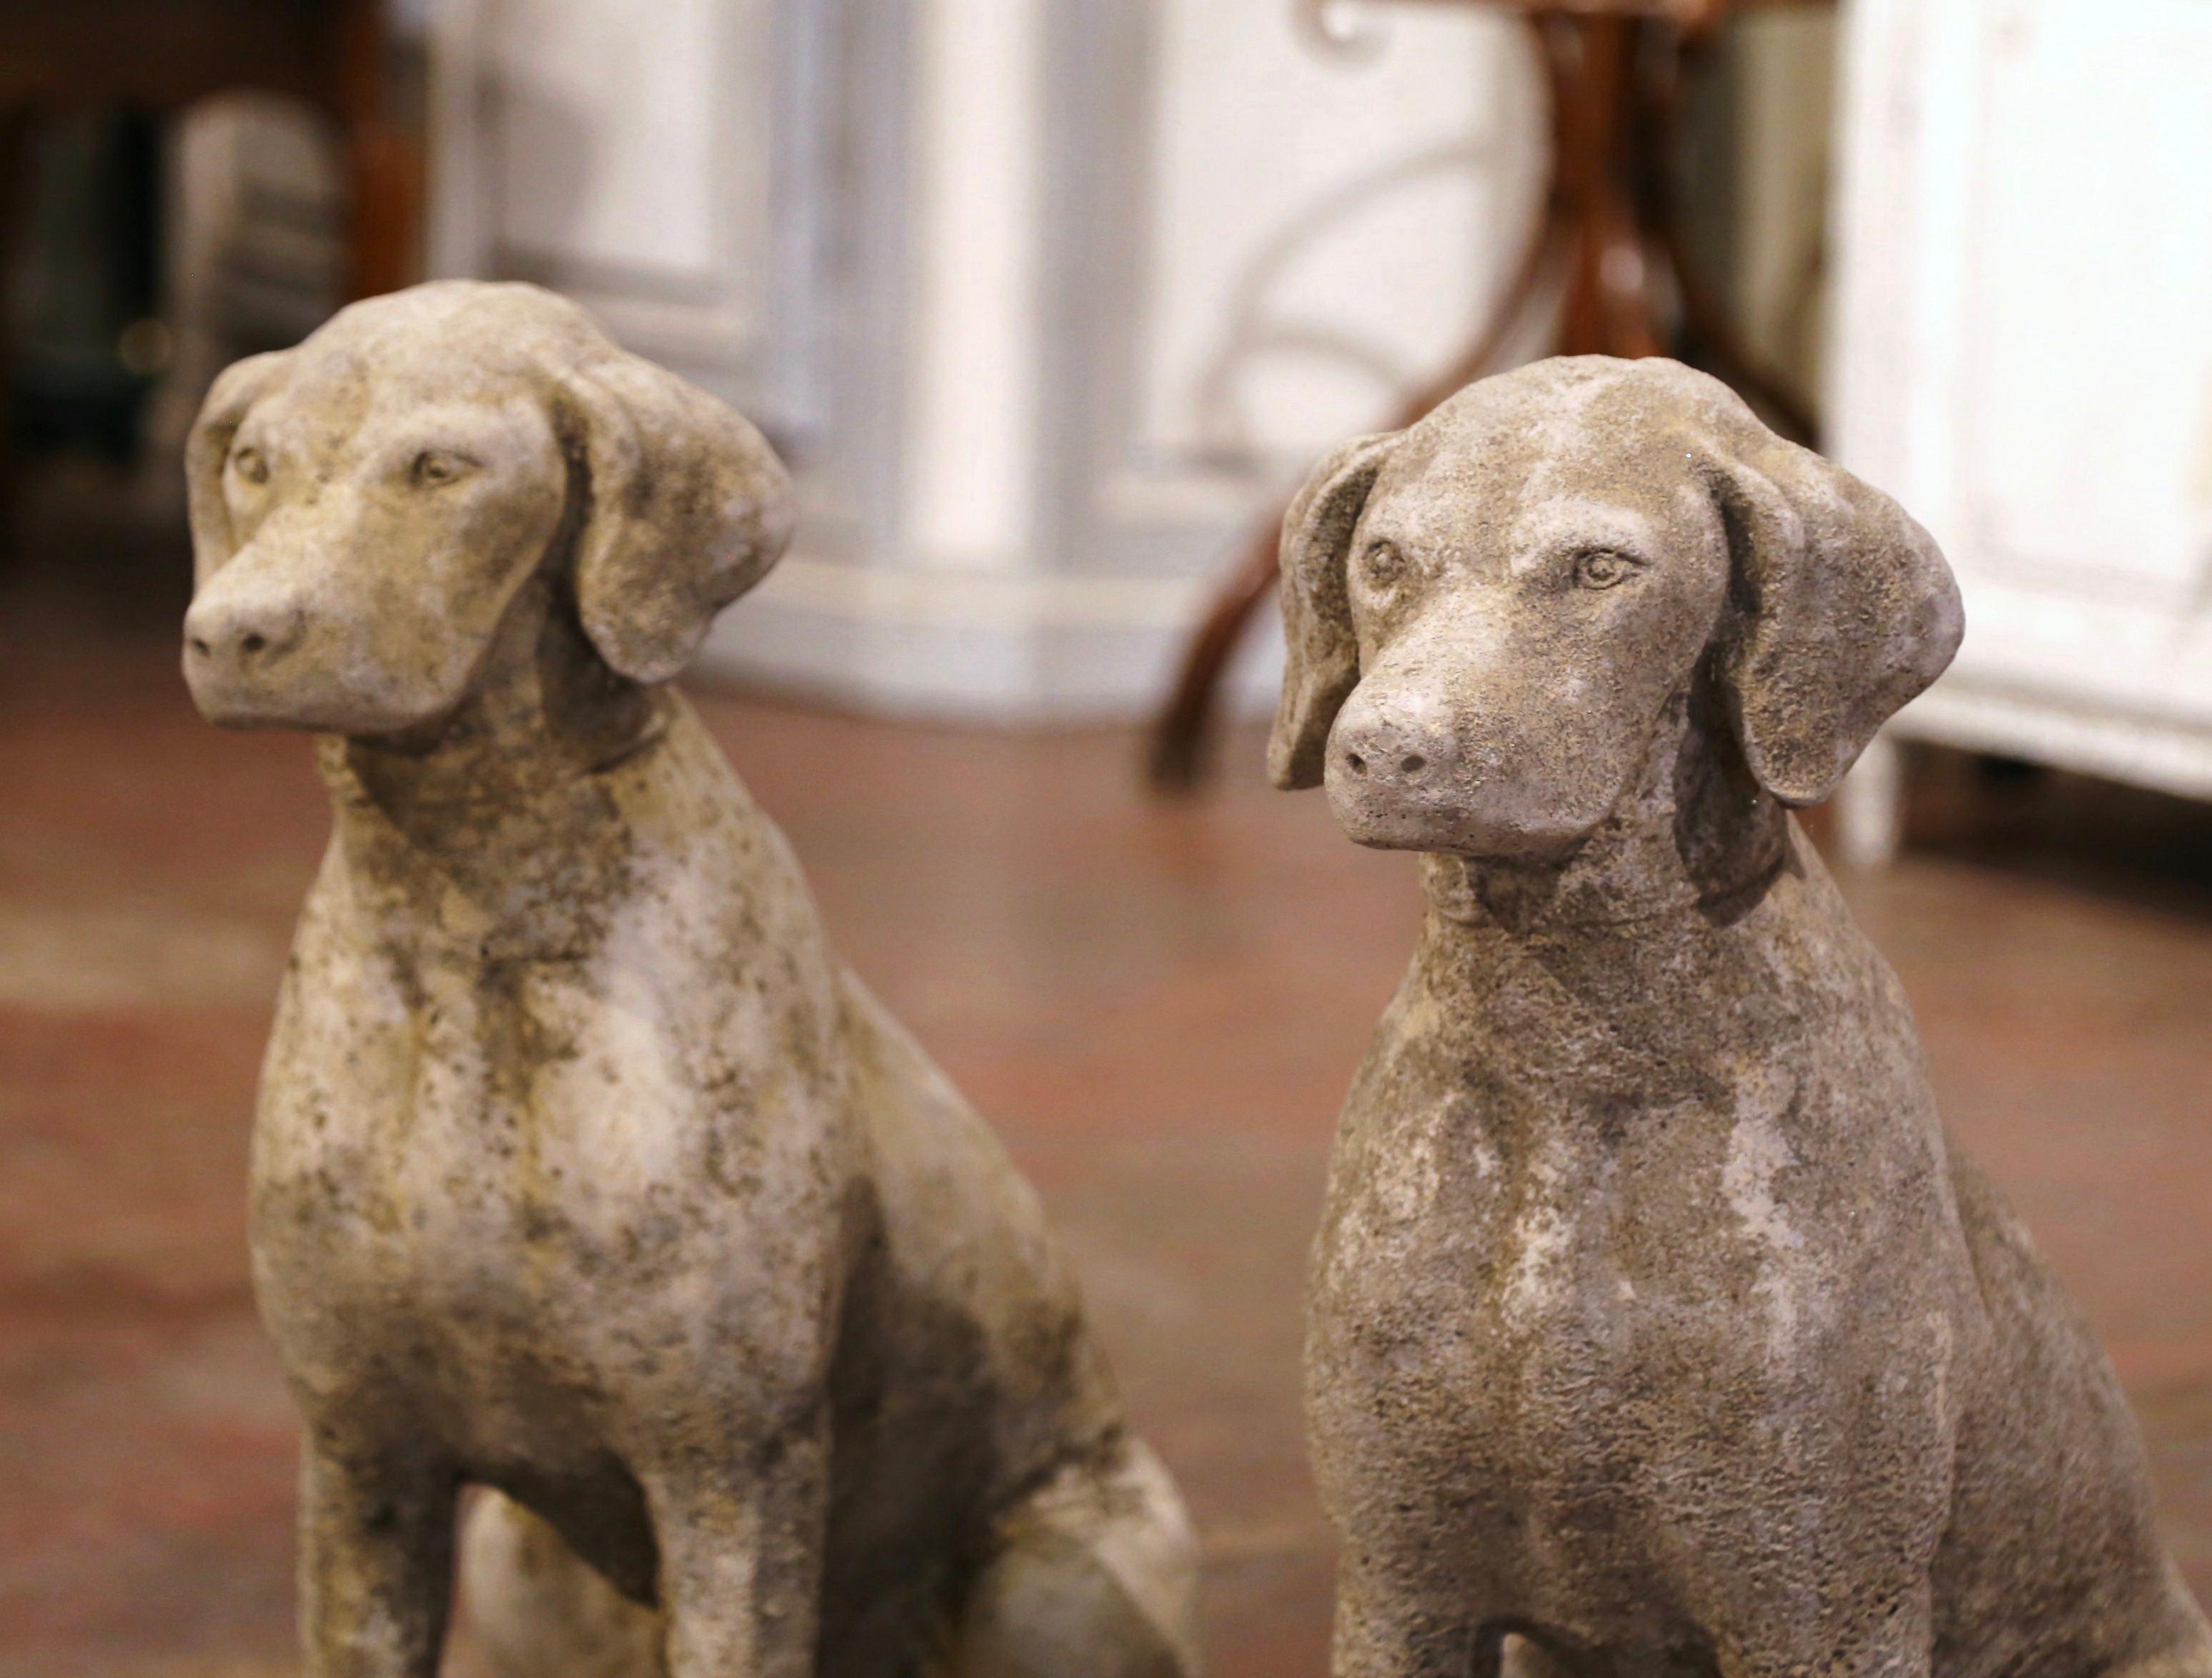 The hunting dogs sculptures were crafted in France, circa 2000. The stately, vintage Labradors with collar are set on a flat base and sitting on their back legs; they have wonderful expression and are further embellished with a collar around their